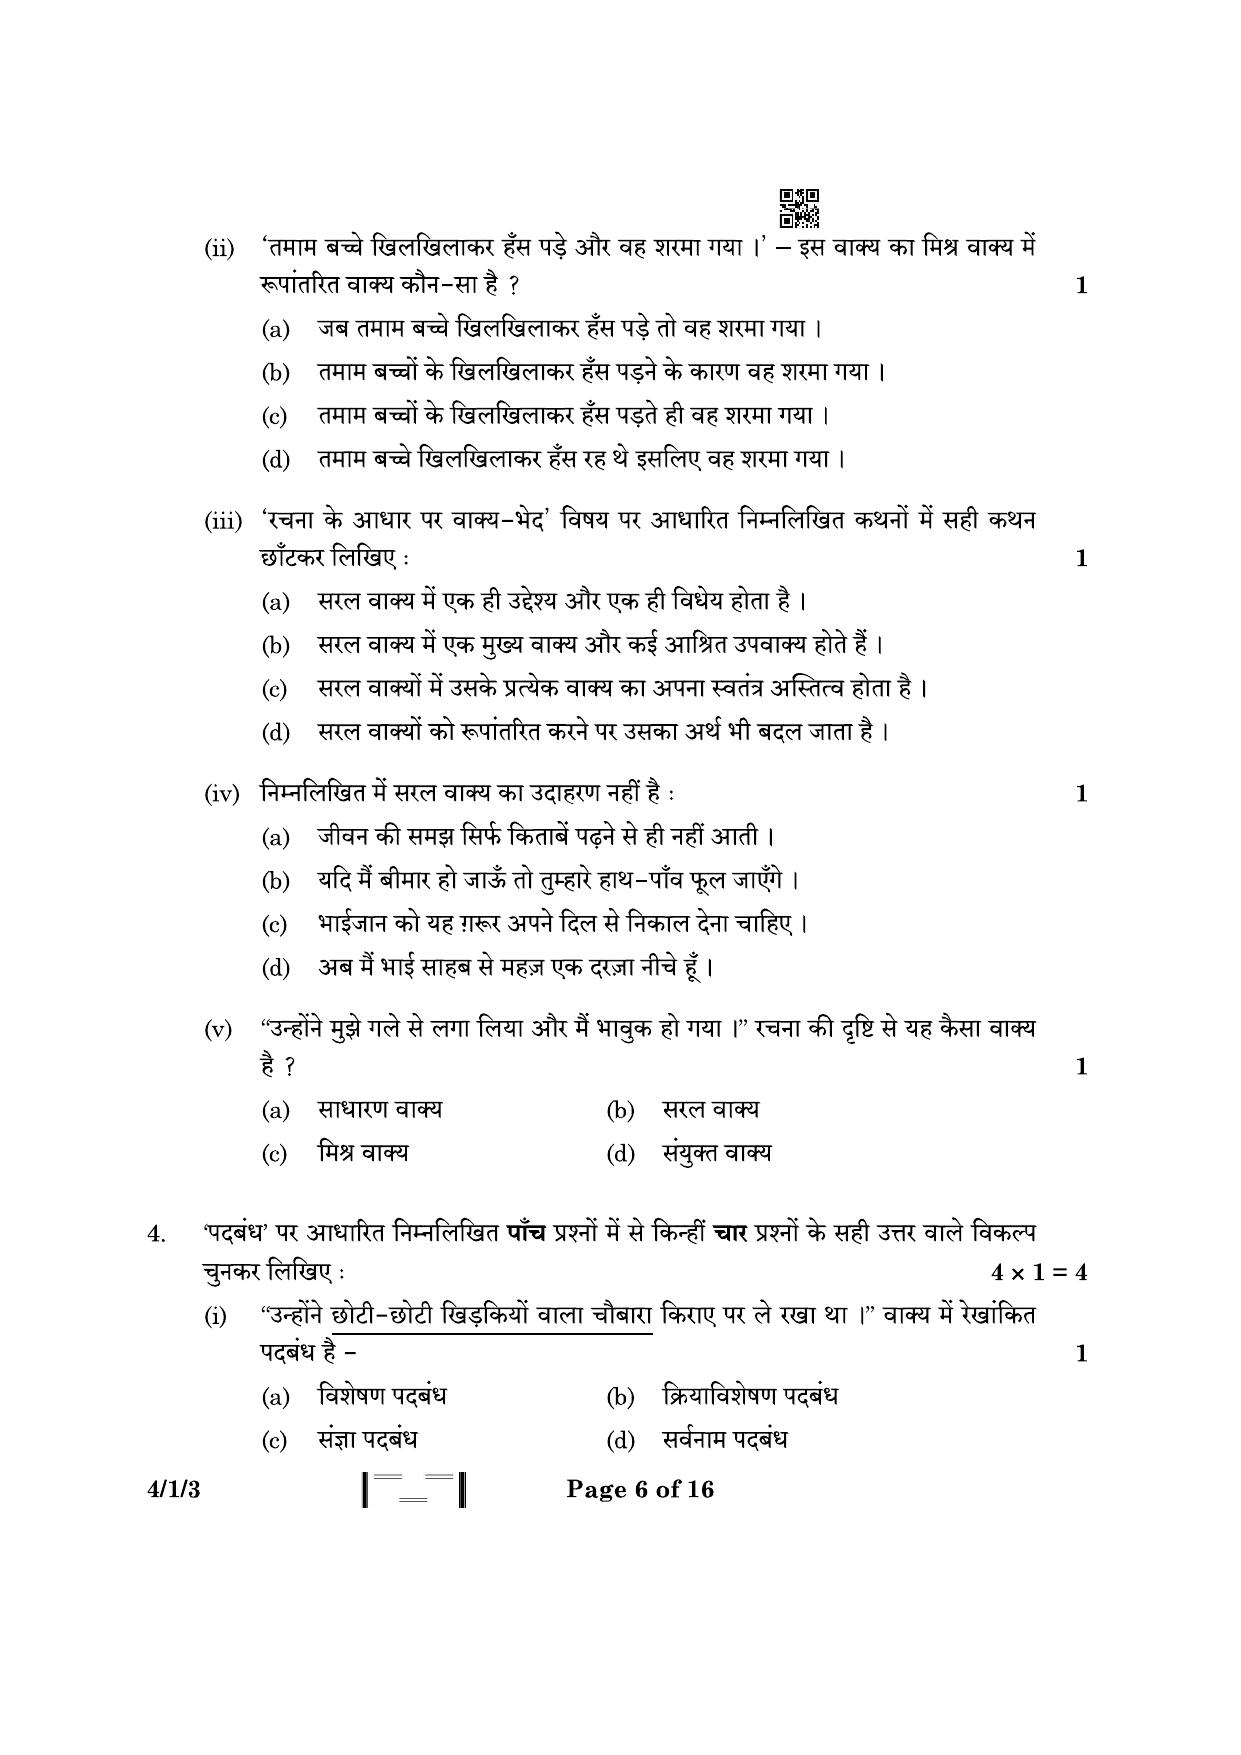 CBSE Class 10 4-1-3 Hindi B 2023 Question Paper - Page 6